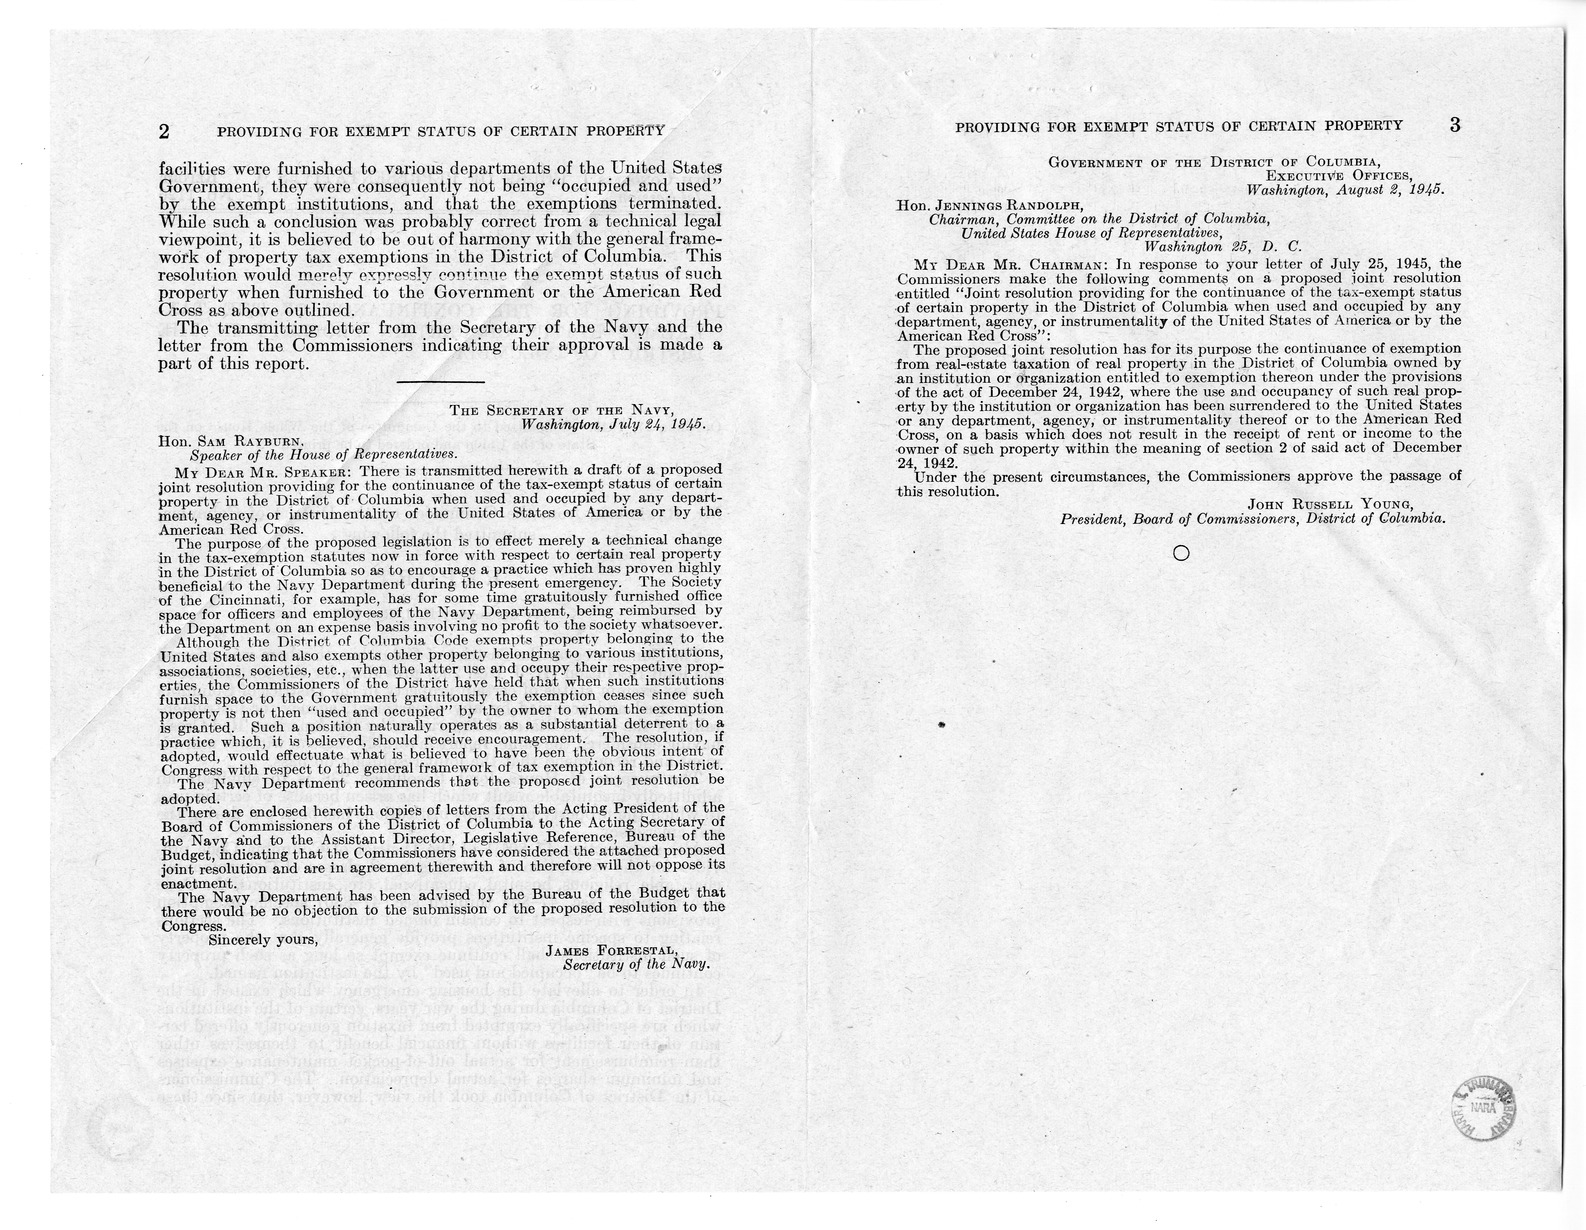 Memorandum from Frederick J. Bailey to M. C. Latta, H.J. Res. 236, Providing for the Continuance of the Tax-Exempt Status of Certain Property in the District of Columbia When Used and Occupied by Any Department, Agency, or Instrumentality of the United States of America or by the American Red Cross, with Attachments